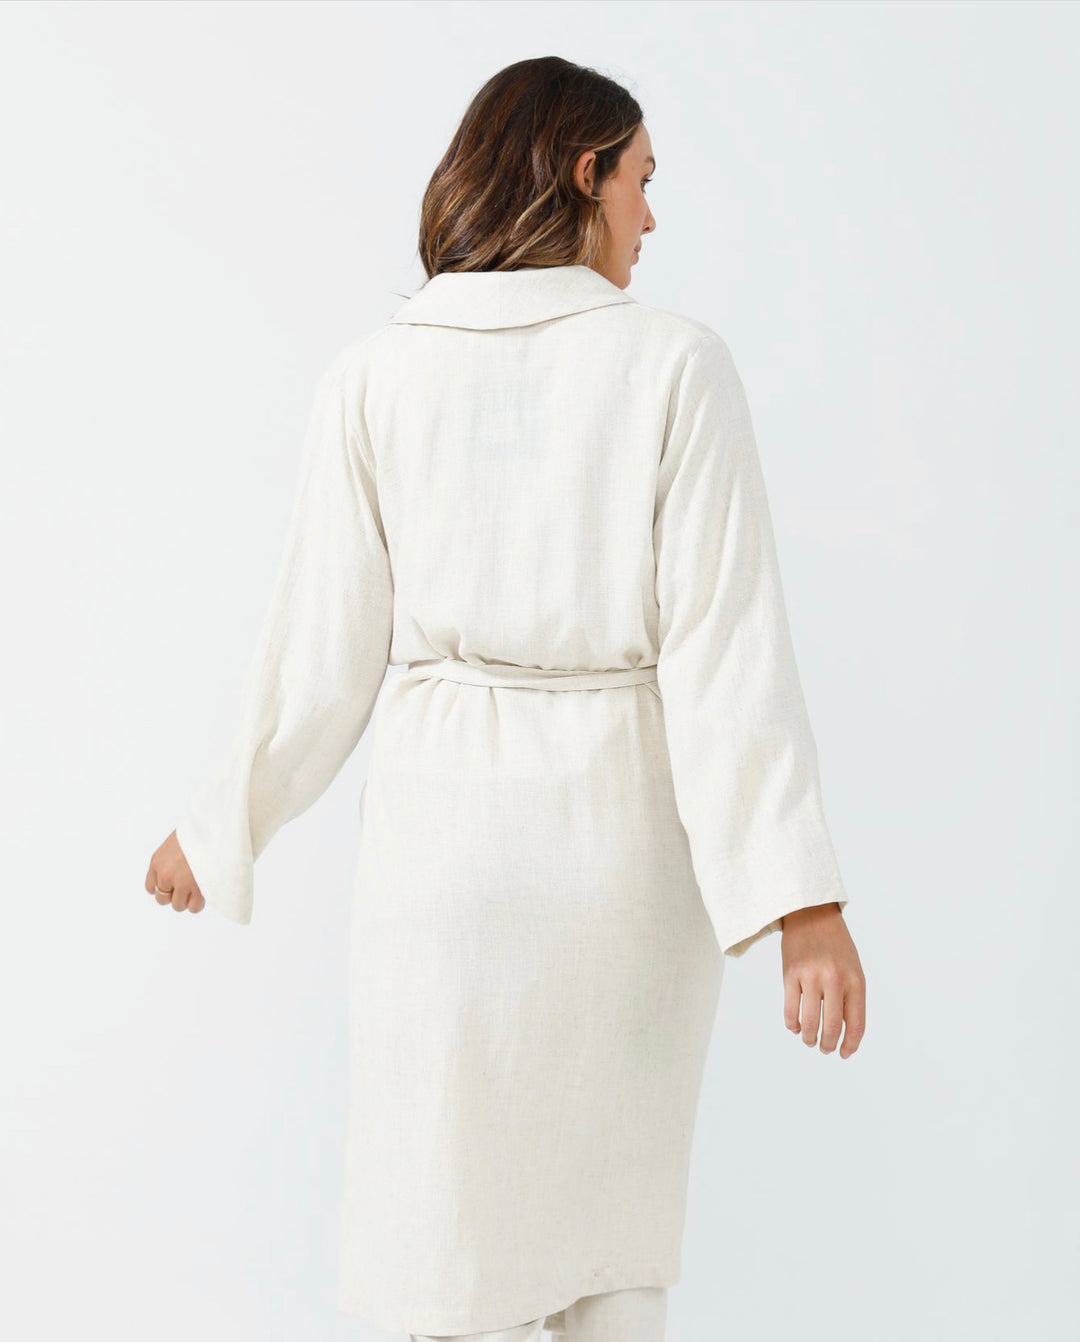 Stay at Home Winter Set Robe - Oatmeal sleepwear Homelove   